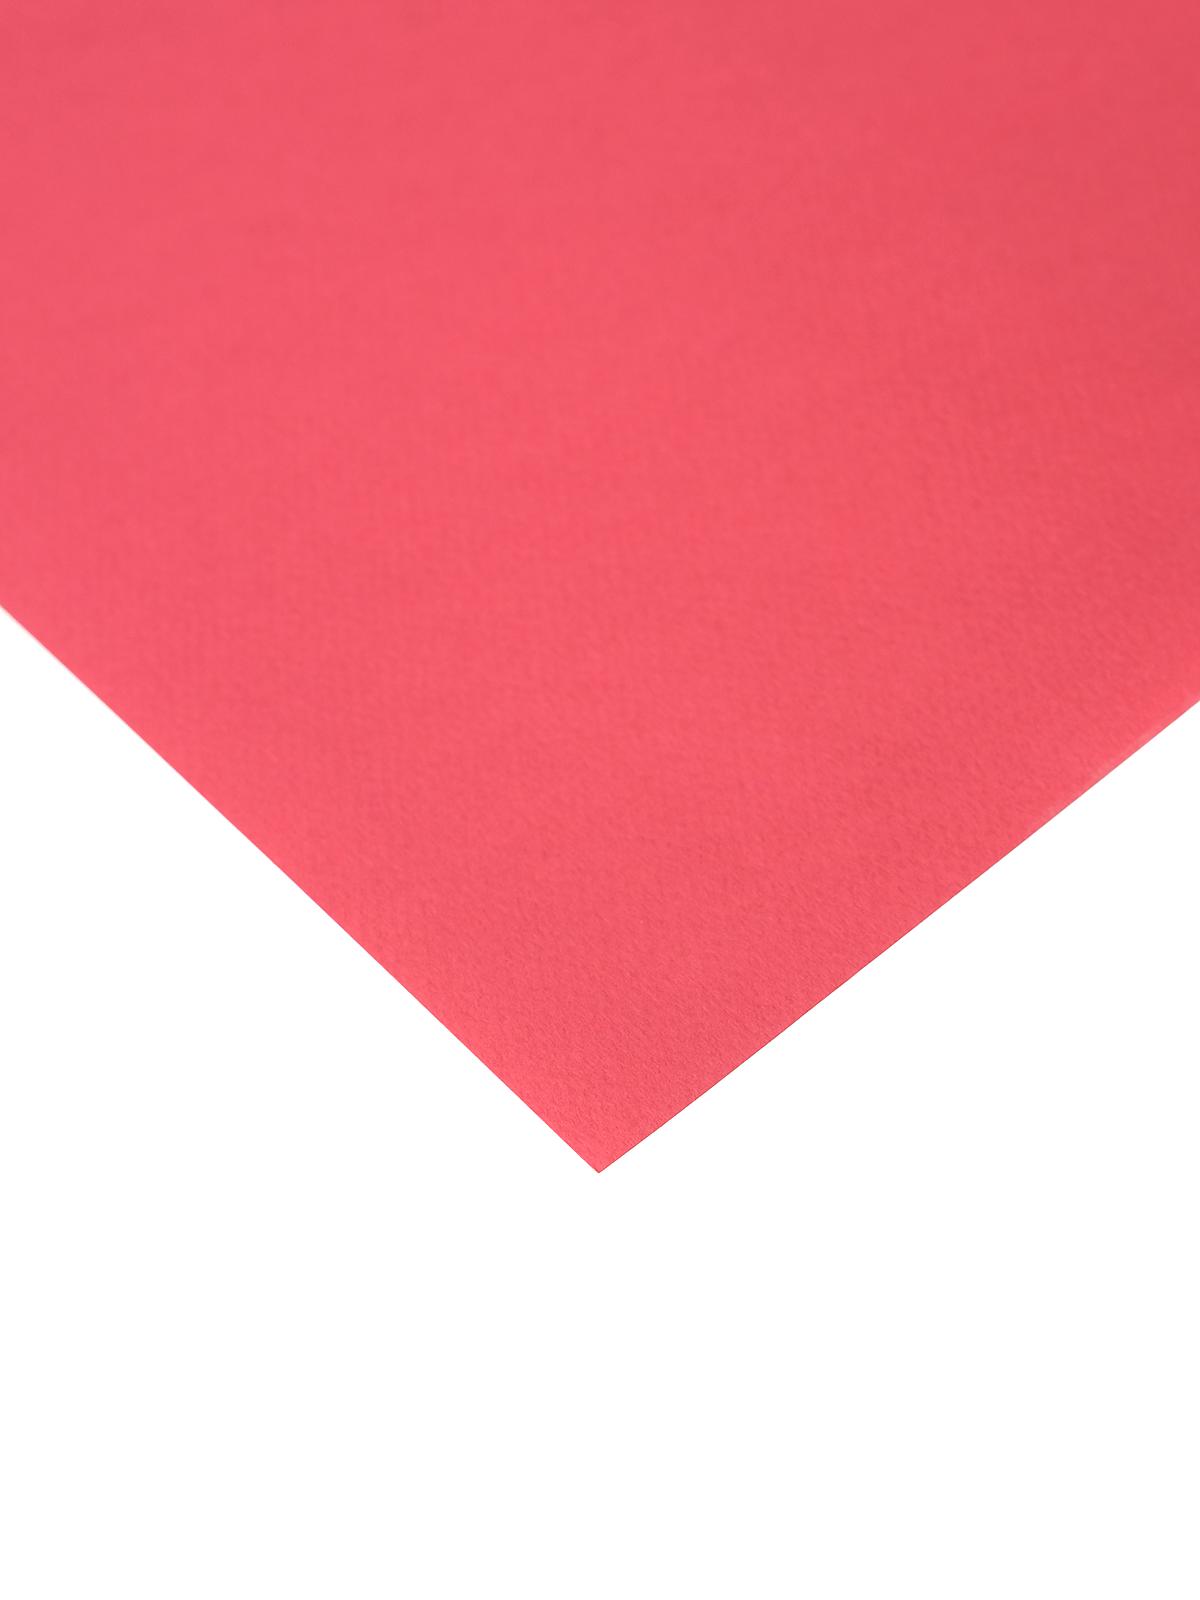 Mi-teintes Tinted Paper Red 8.5 In. X 11 In.